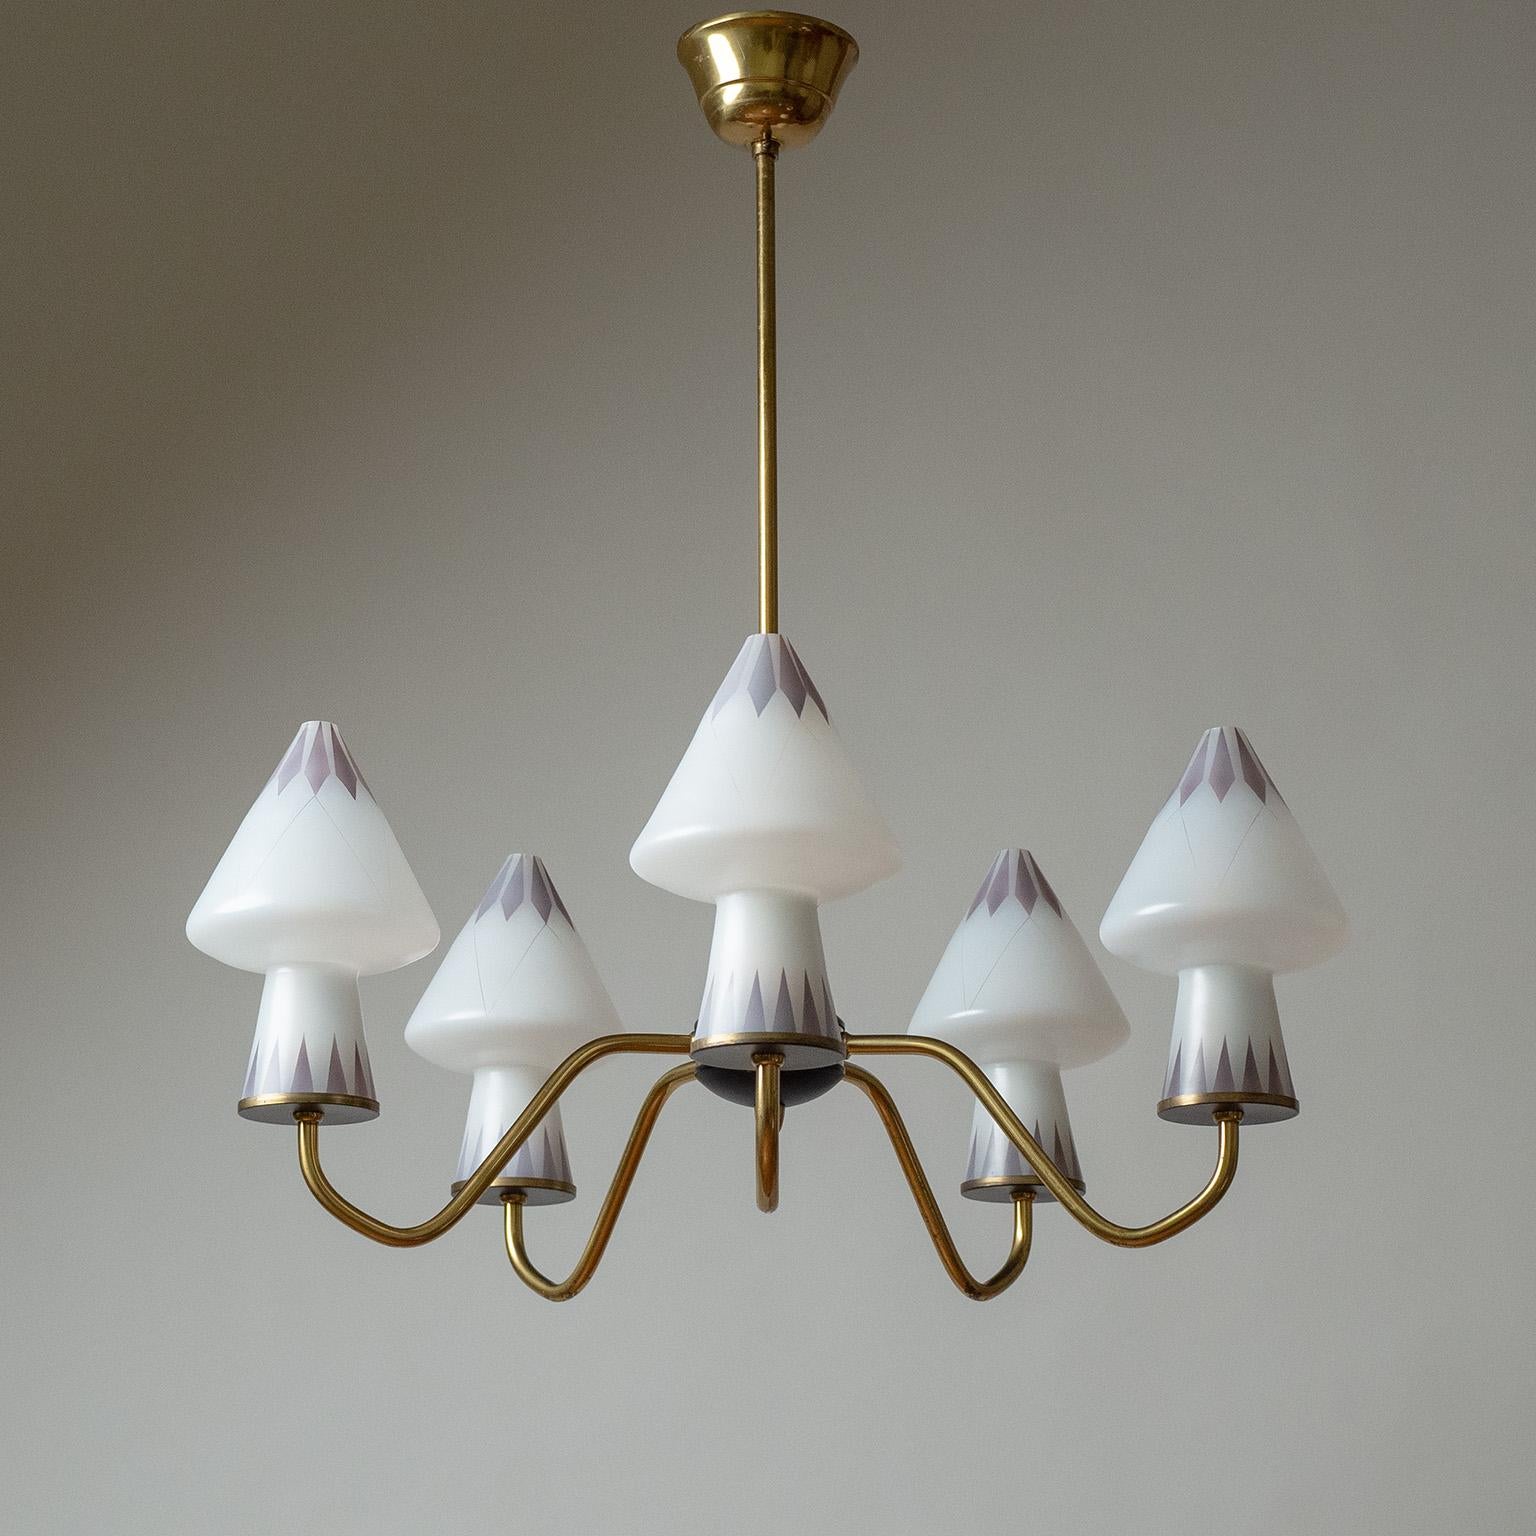 Sublime Sewdish brass chandelier from the 1950s with enameled glass diffusers. Five brass arms, each with a 'mushroom' shaped glass diffuser enameled in white and subdued purple. Very nice original condition with a light patina. Original bakelite